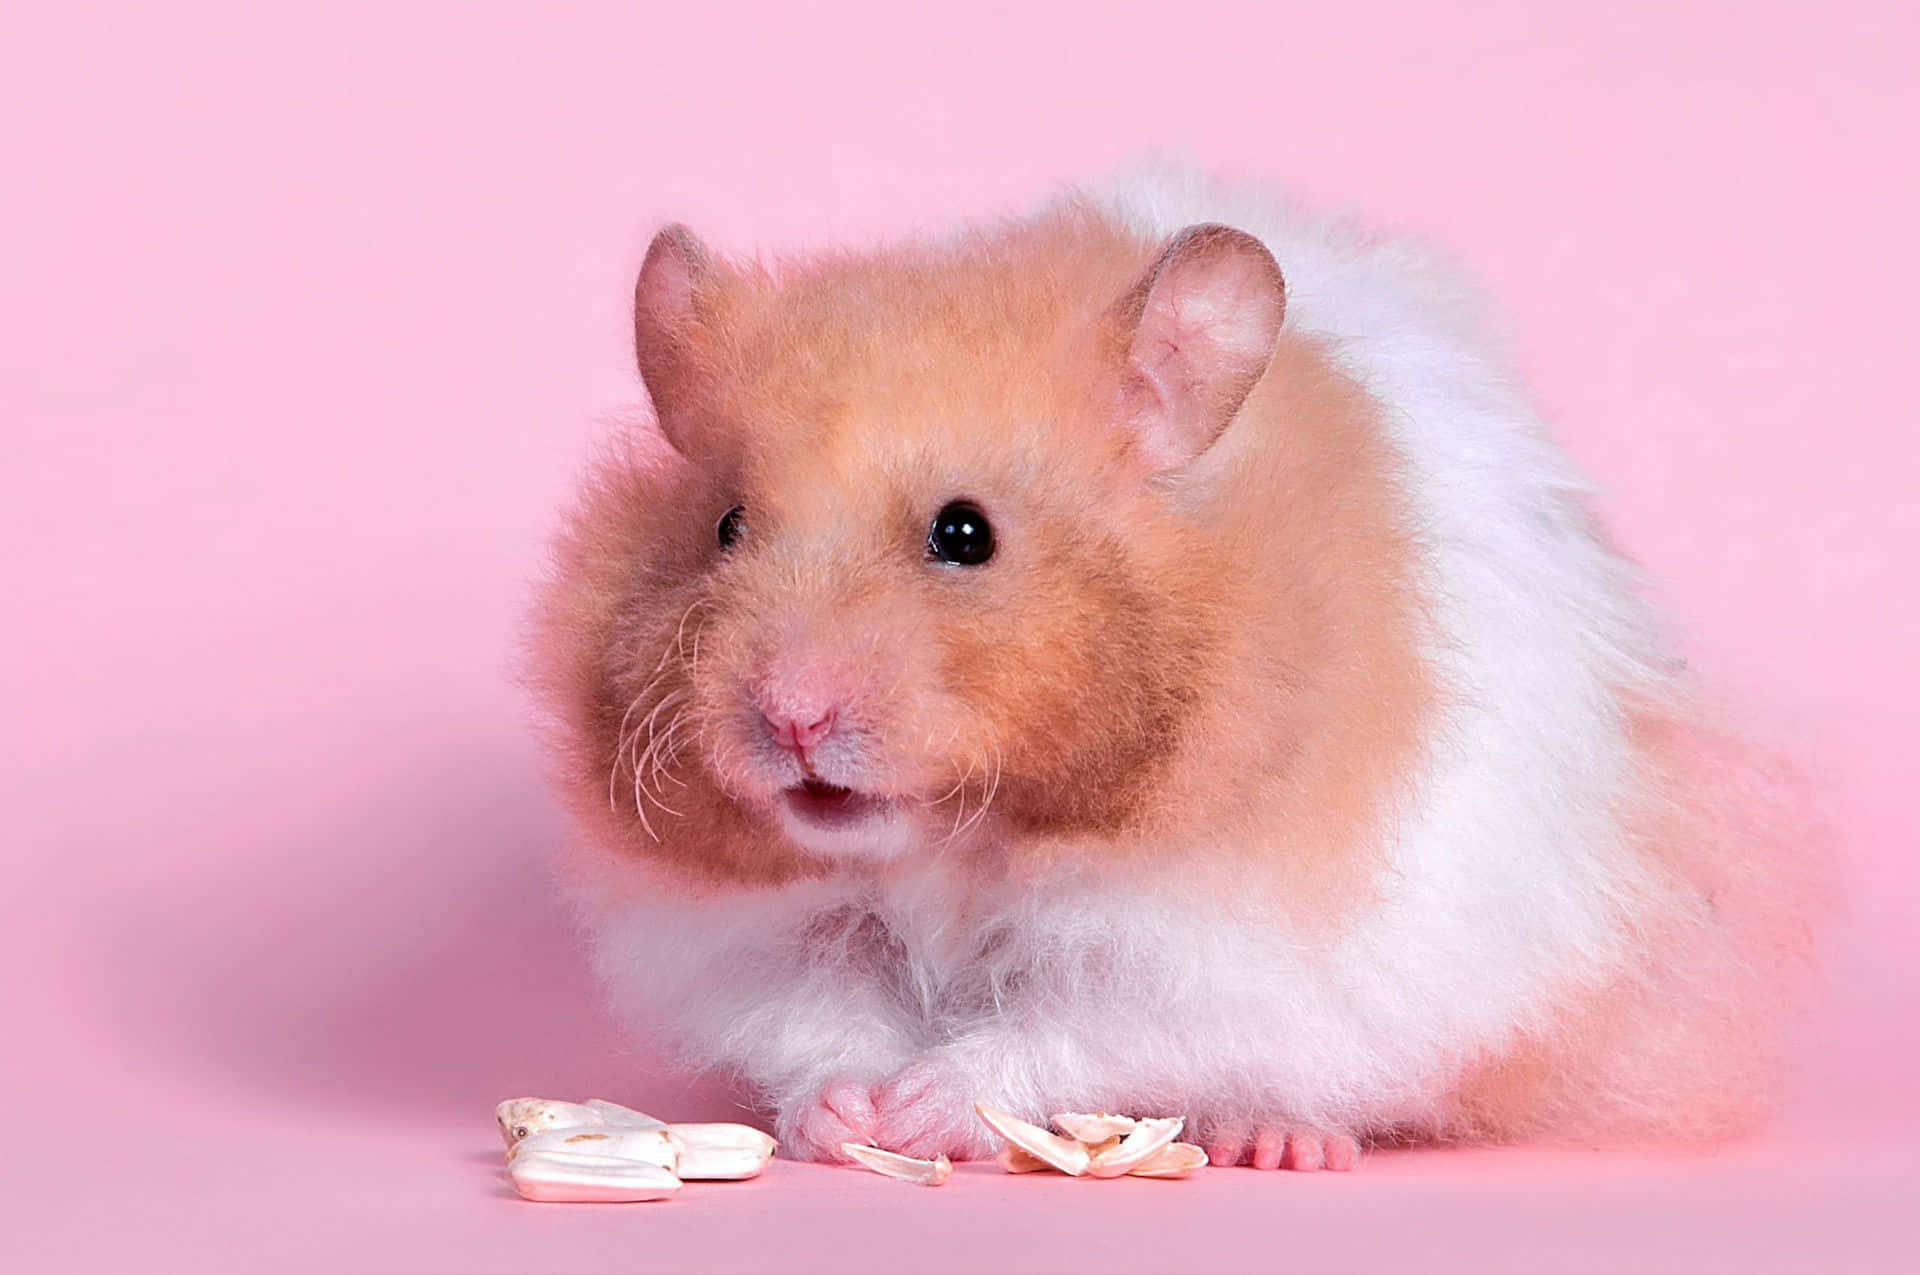 This Playful, Mischievous Hamster Is Having The Time Of Its Life! Background